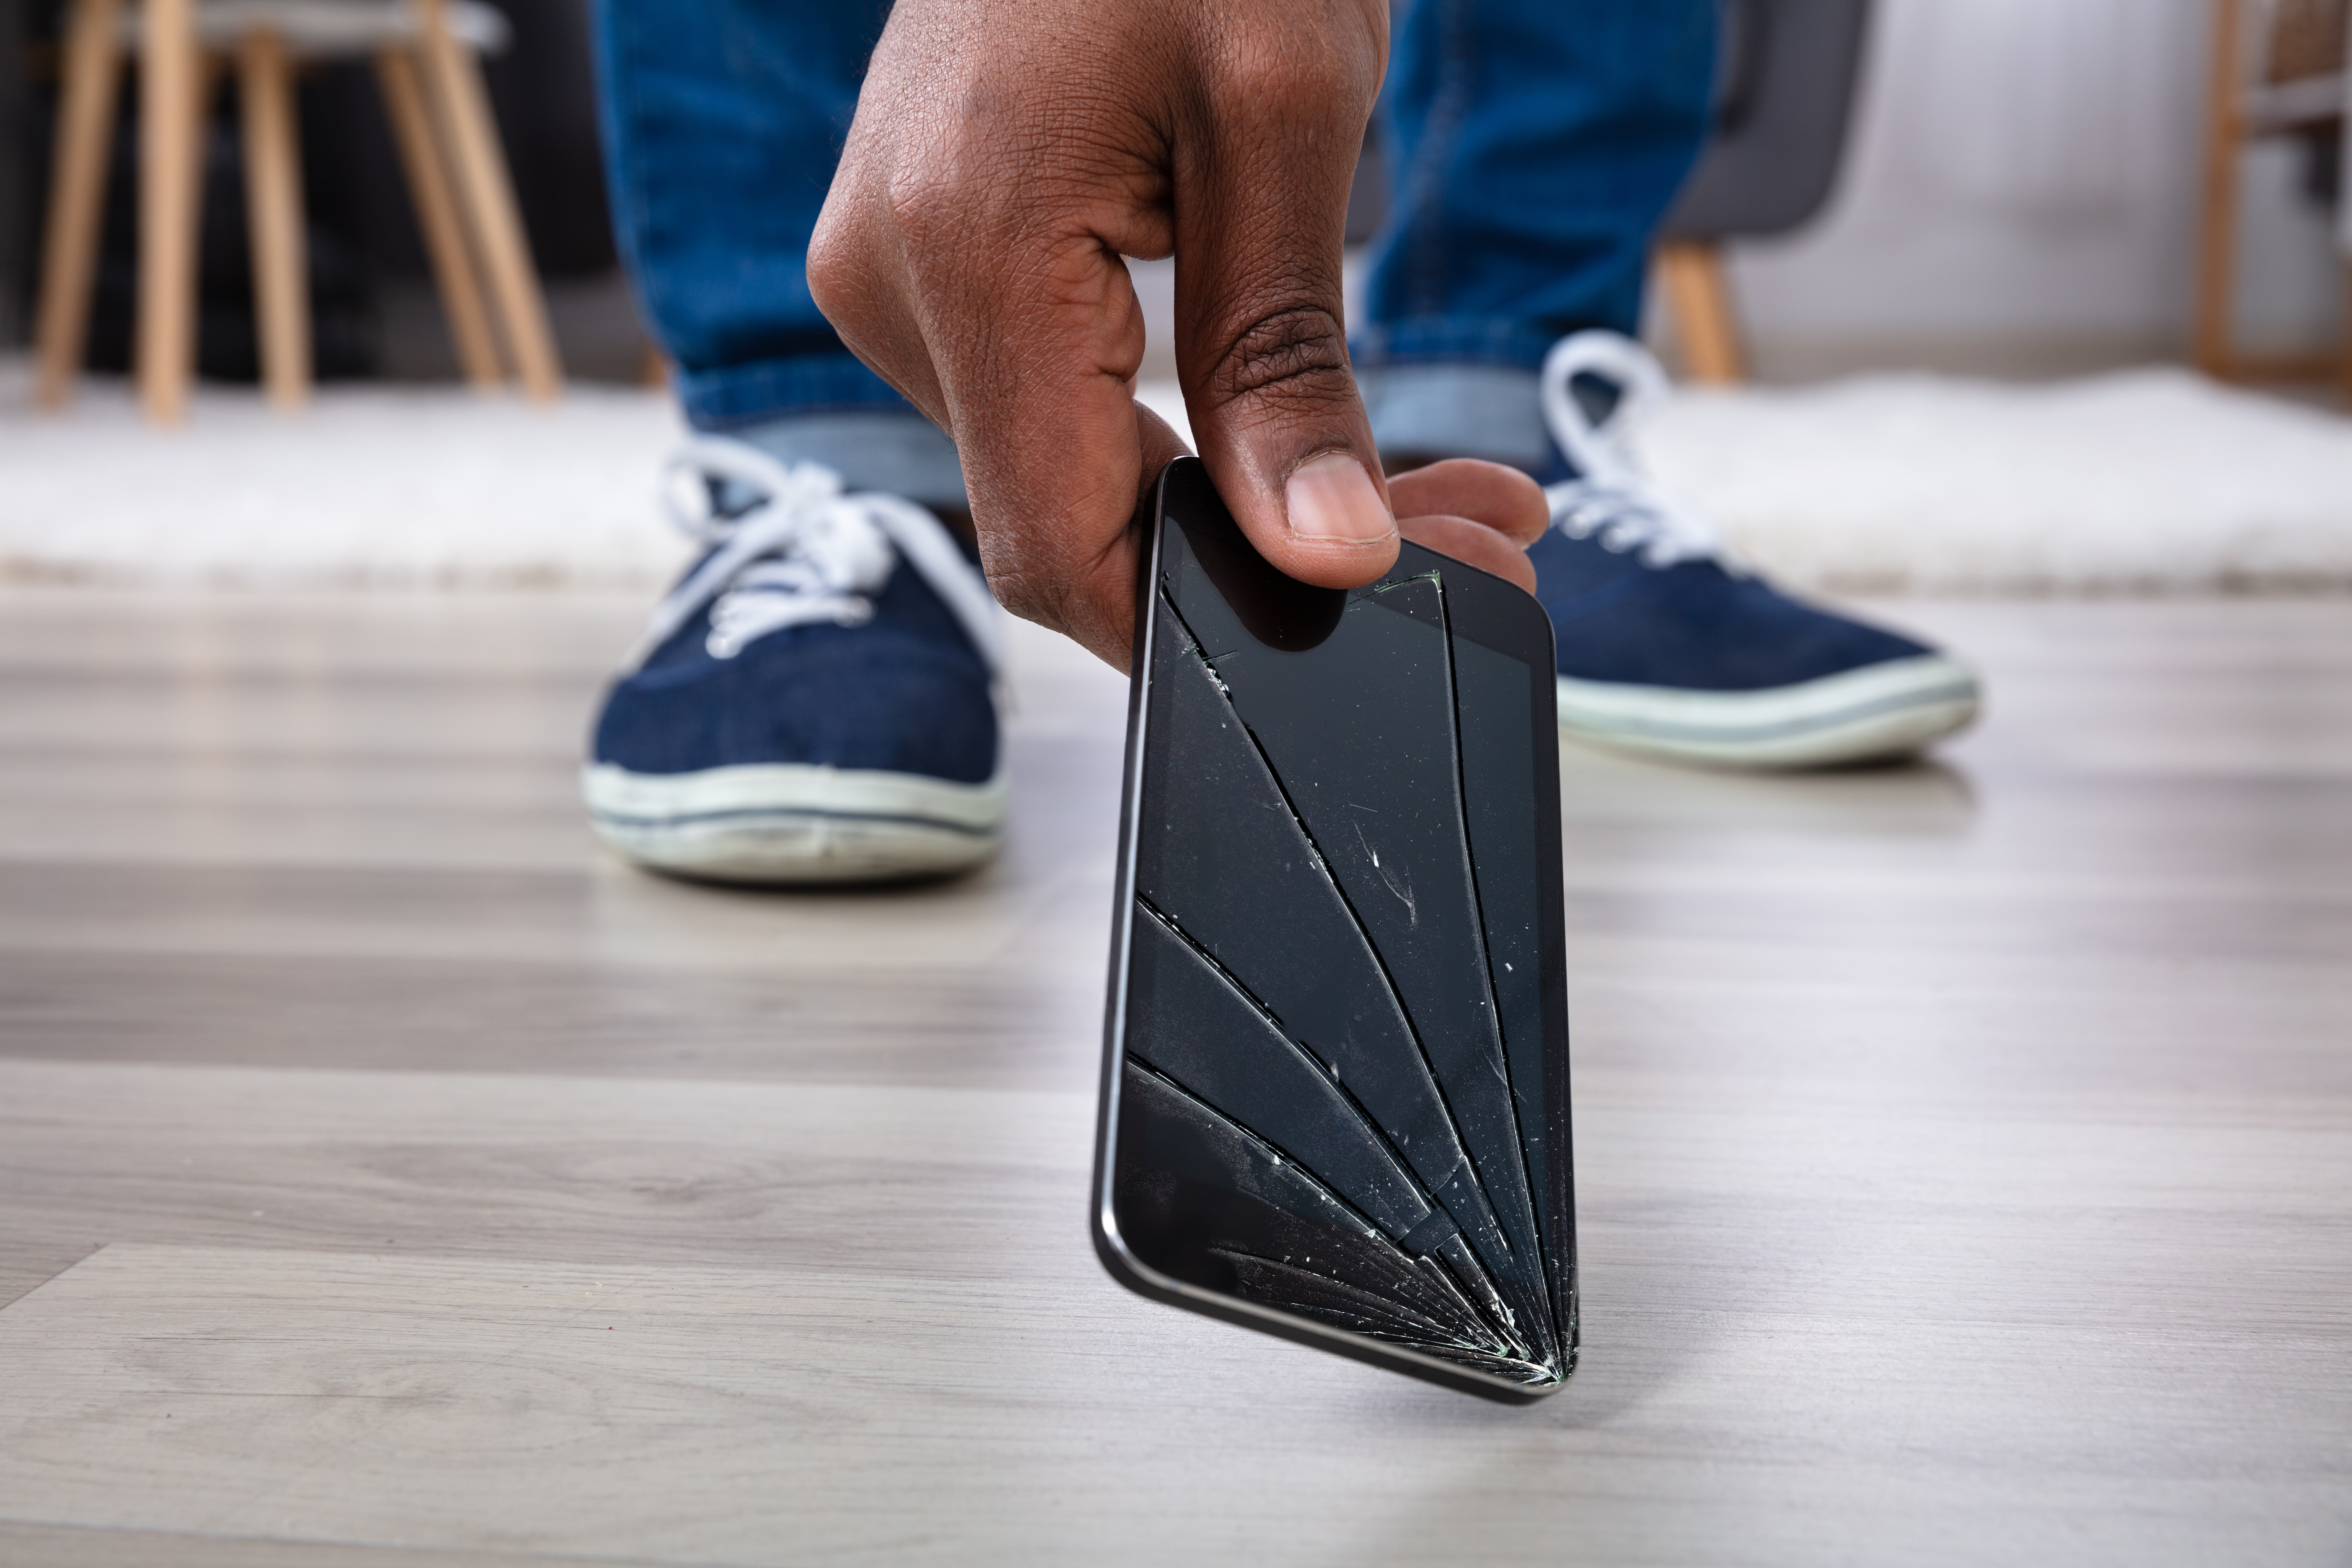 Man picking up a cracked smartphone off the ground